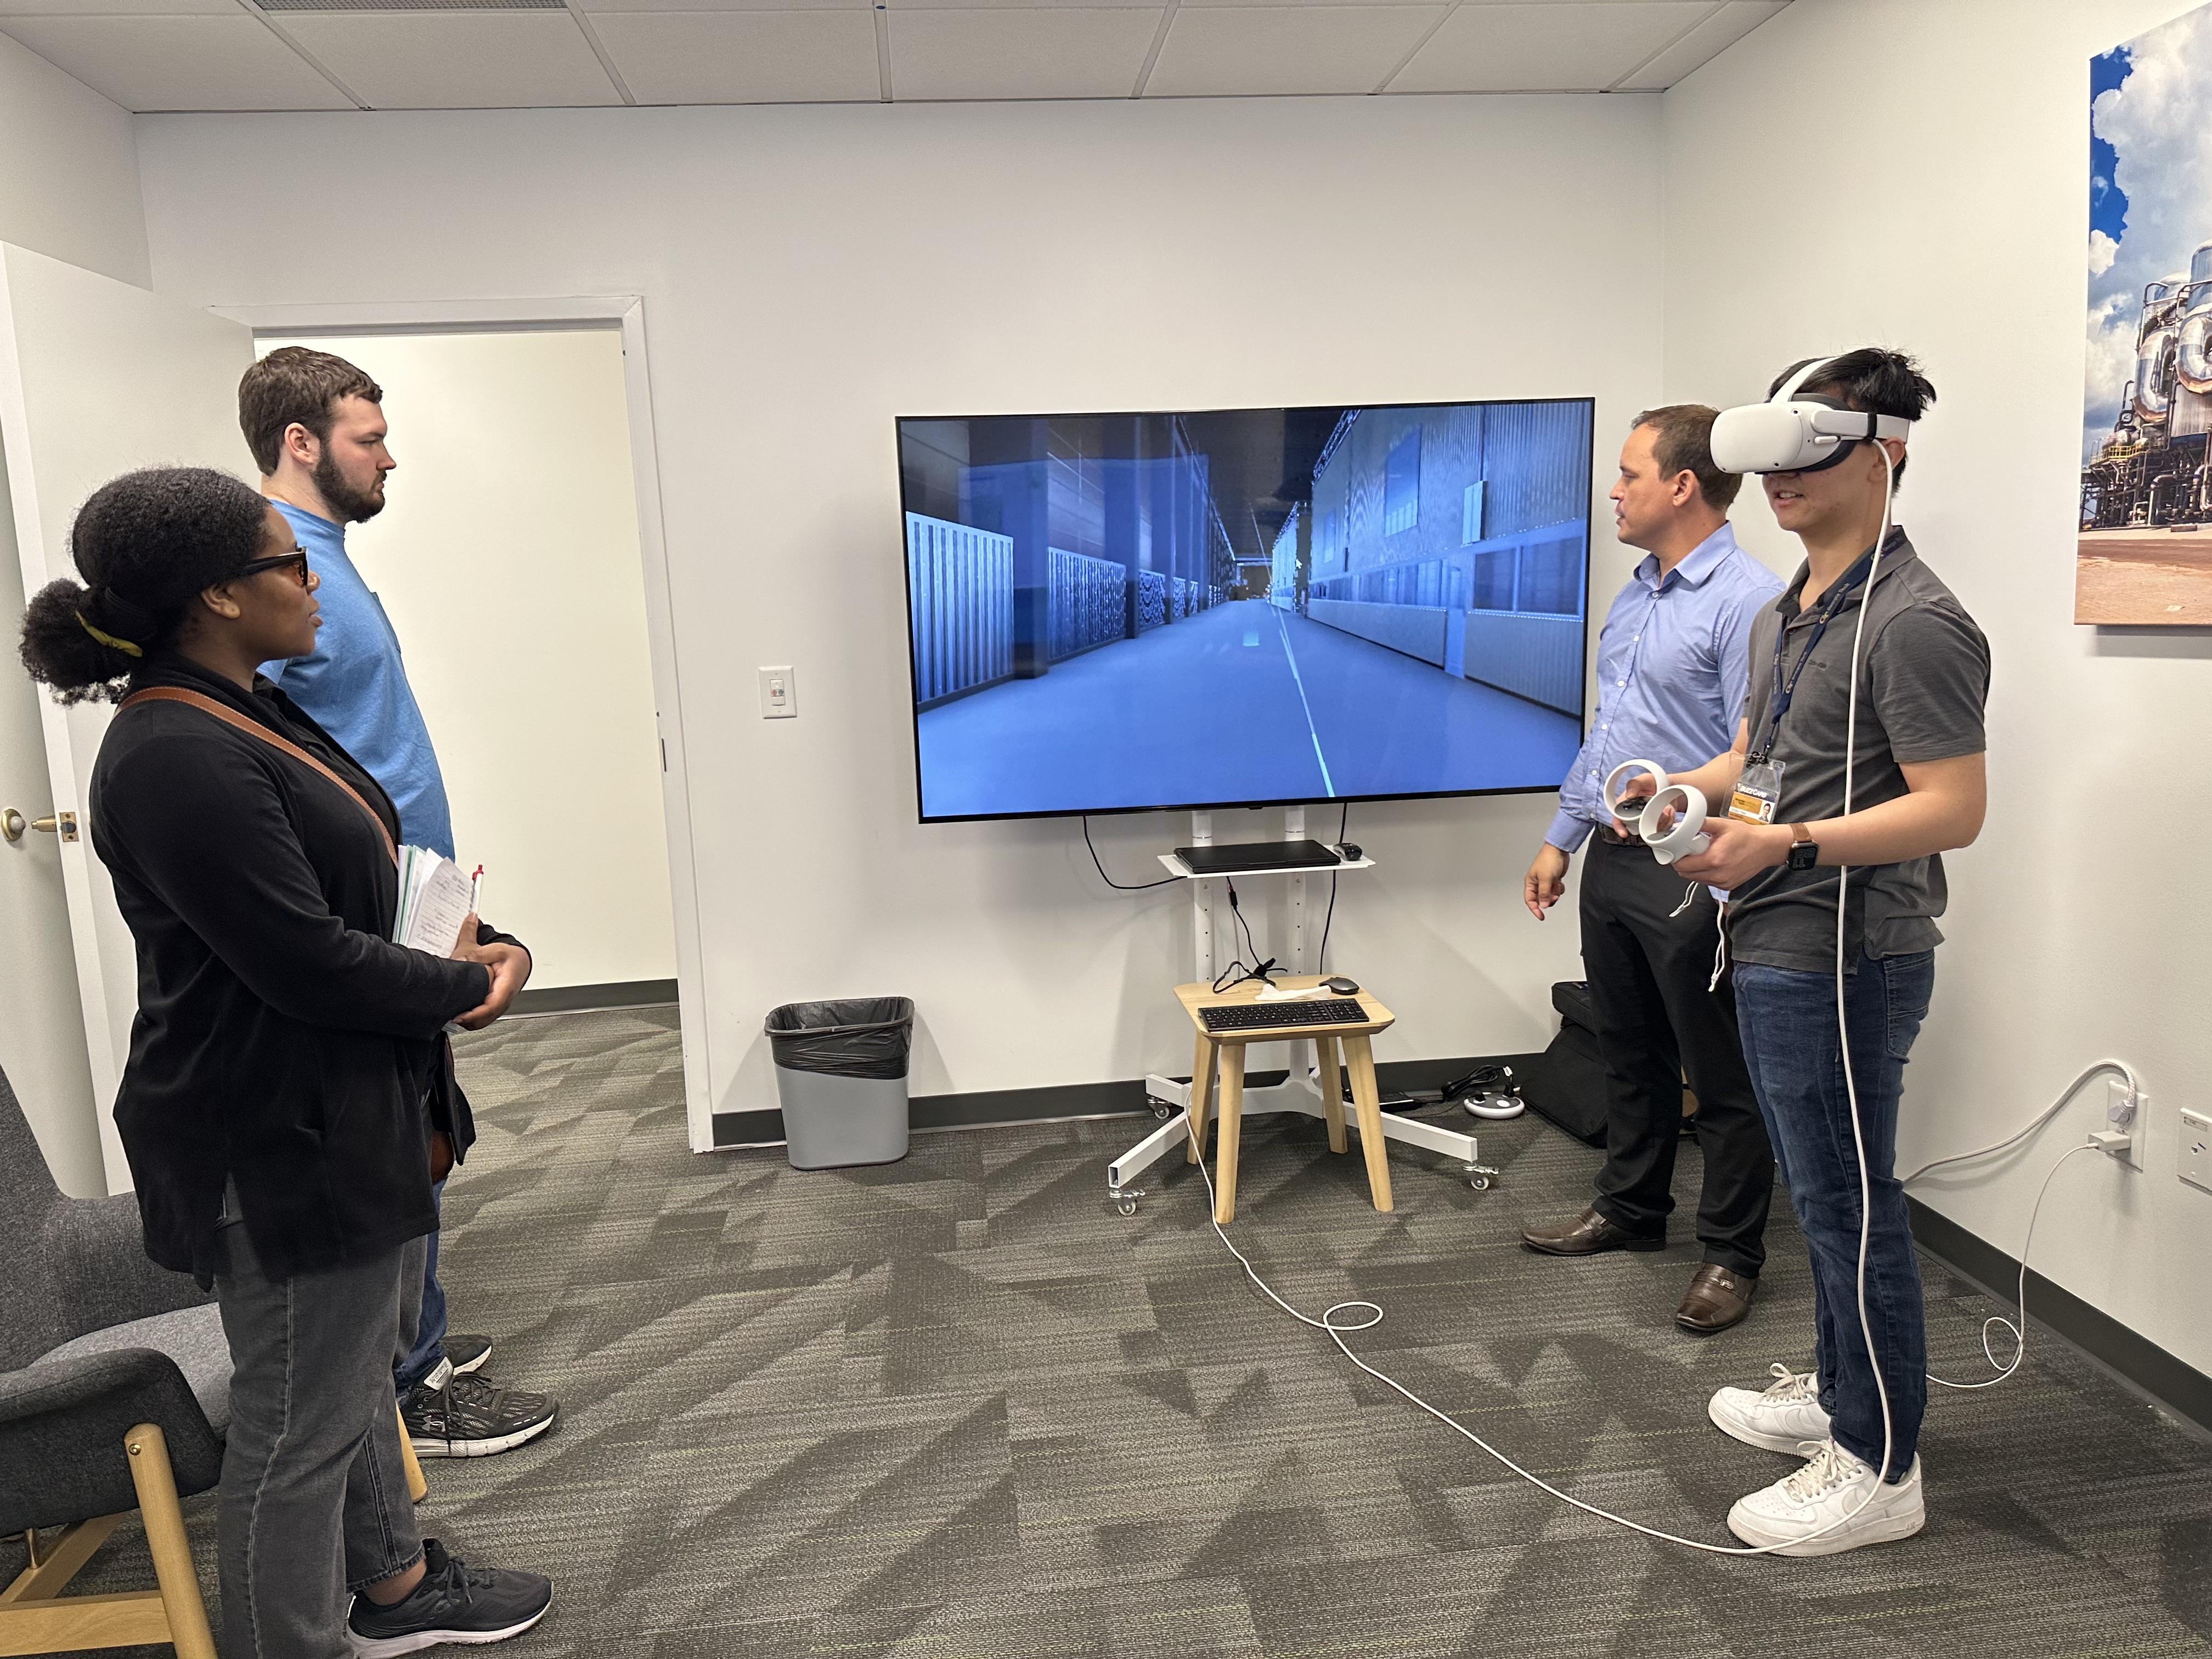 Georgia Tech student trying the virtual reality software systems at the Valmet Lab